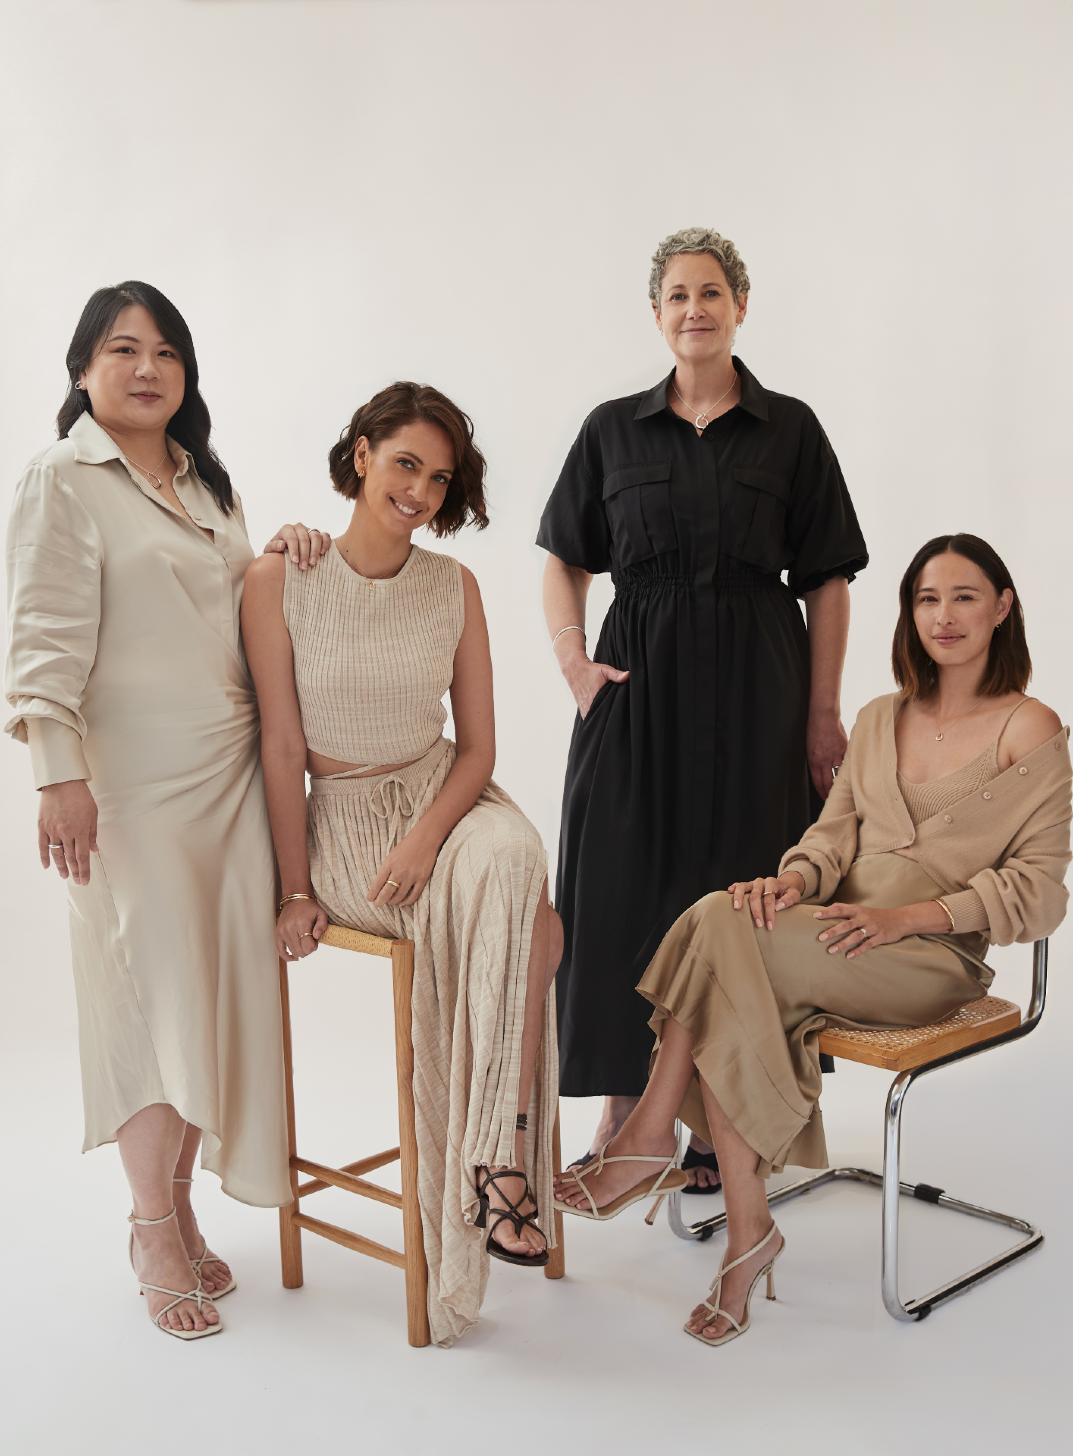 A photo of (from left to right): Dr Yeh Chen Lee, Brooke Boney, Siobhan O’Sullivan & Eleanor Pendleton for the 2021 OCRF x Georg Jensen campaign